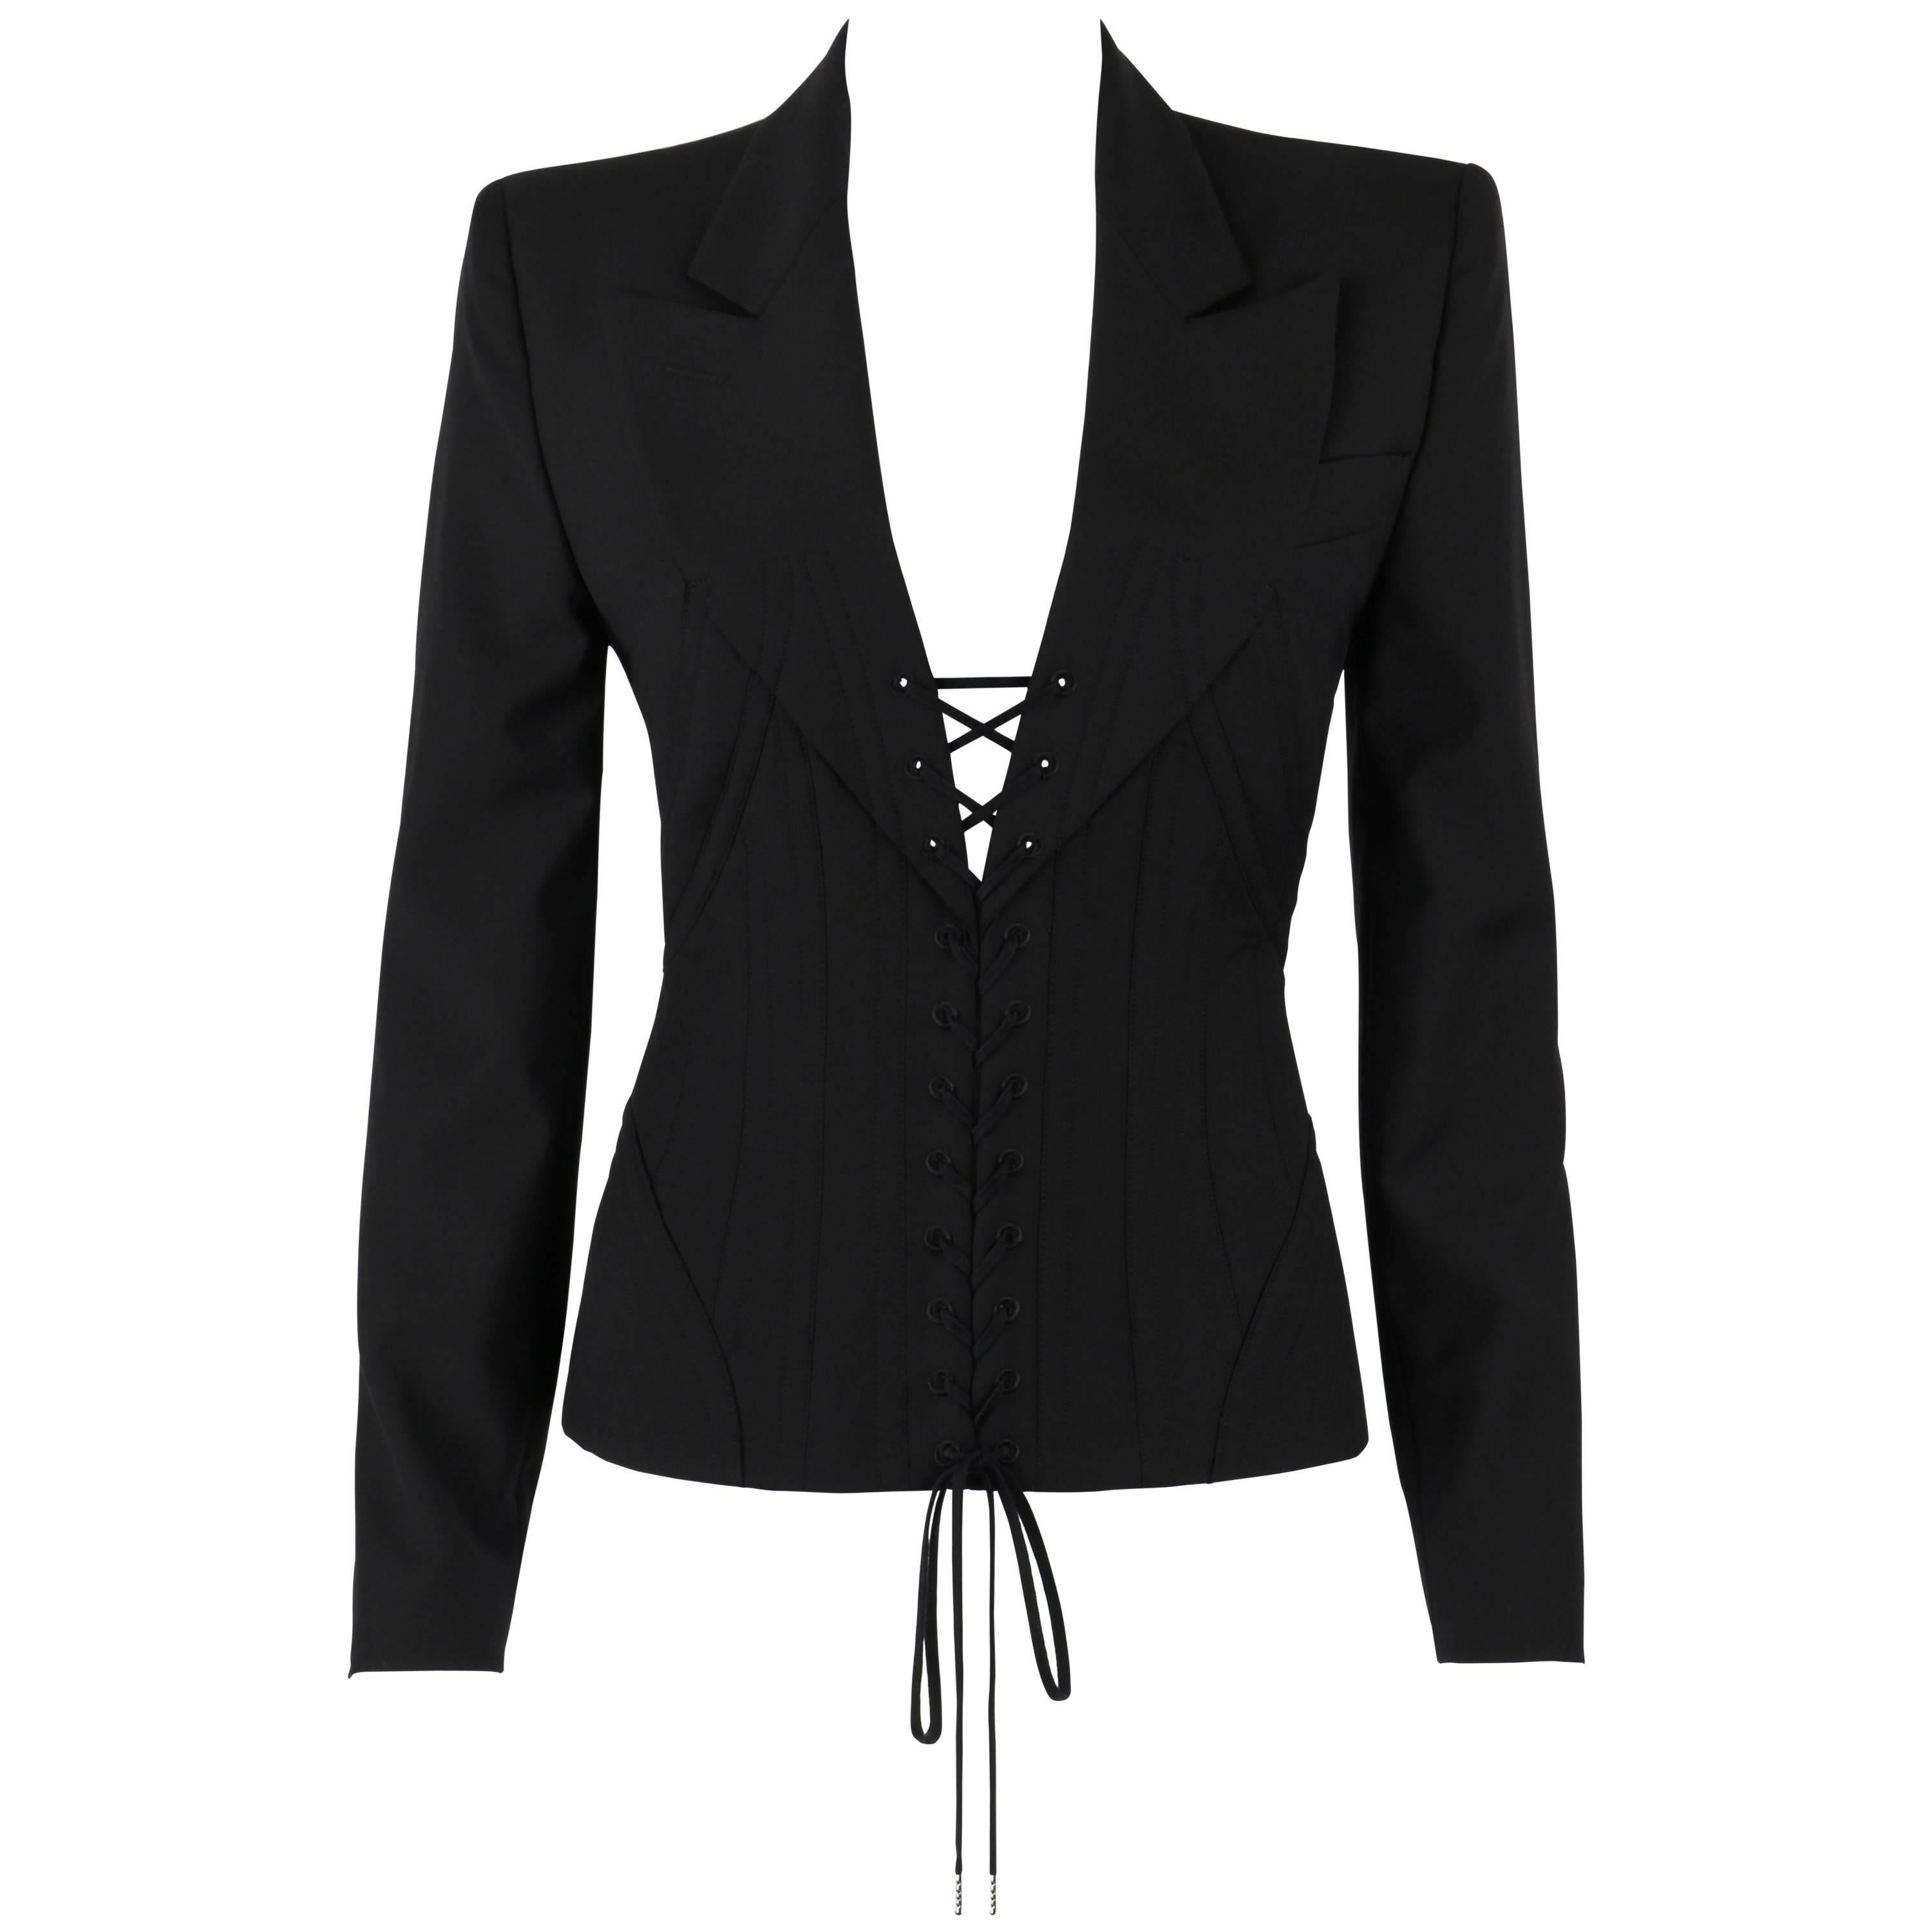 ALEXANDER McQUEEN S/S 2002 "Dance of the Twisted Bull" Black Corseted Blazer 44 For Sale